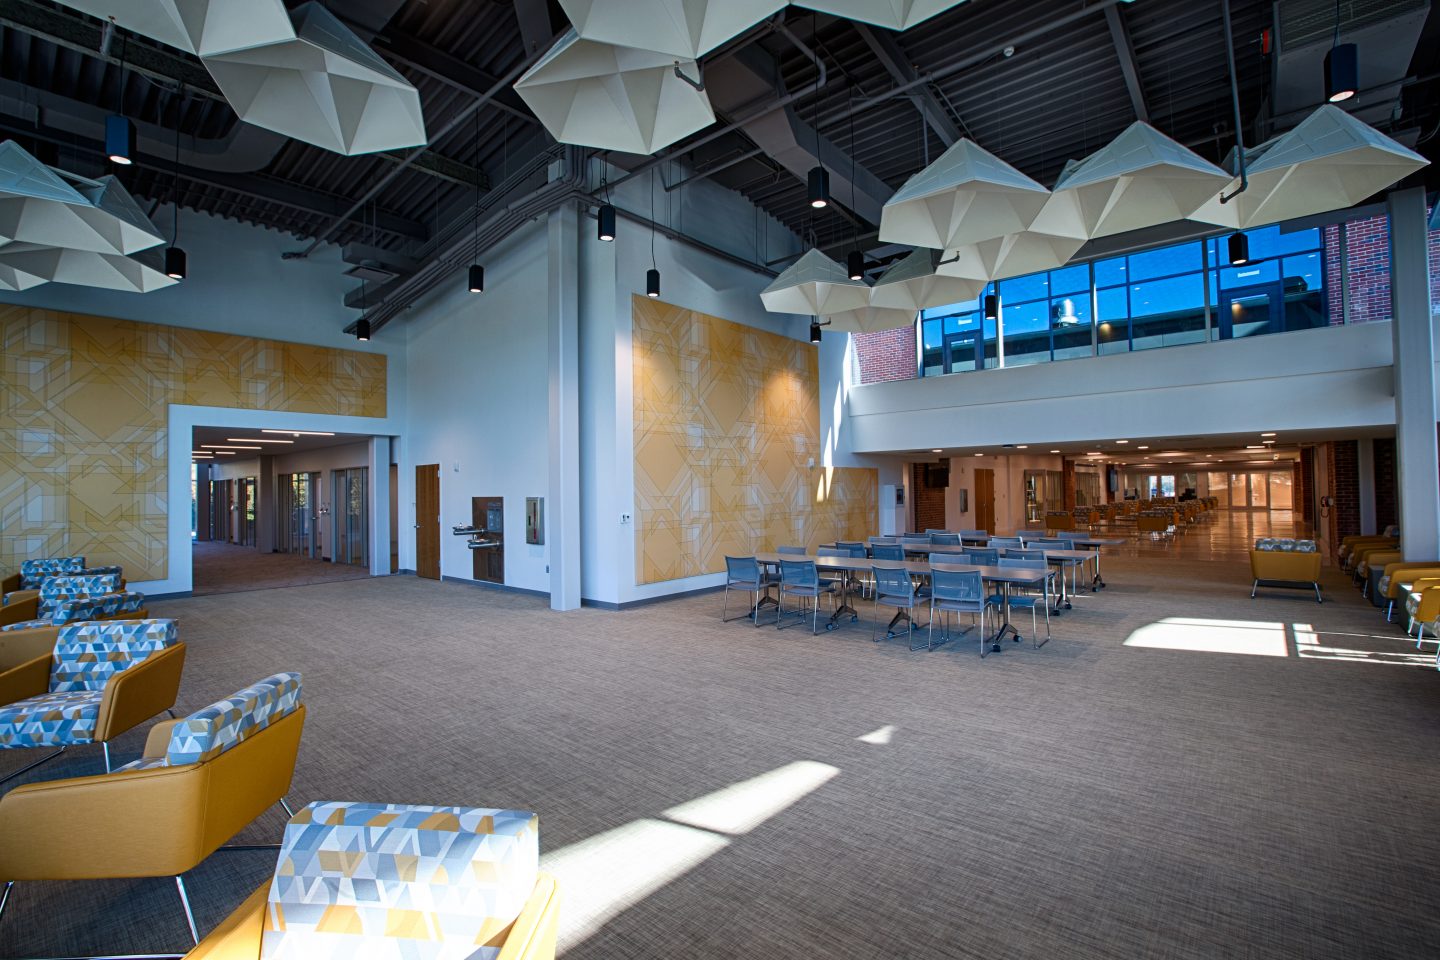 Seating space in the main lobby area of the UC - first floor